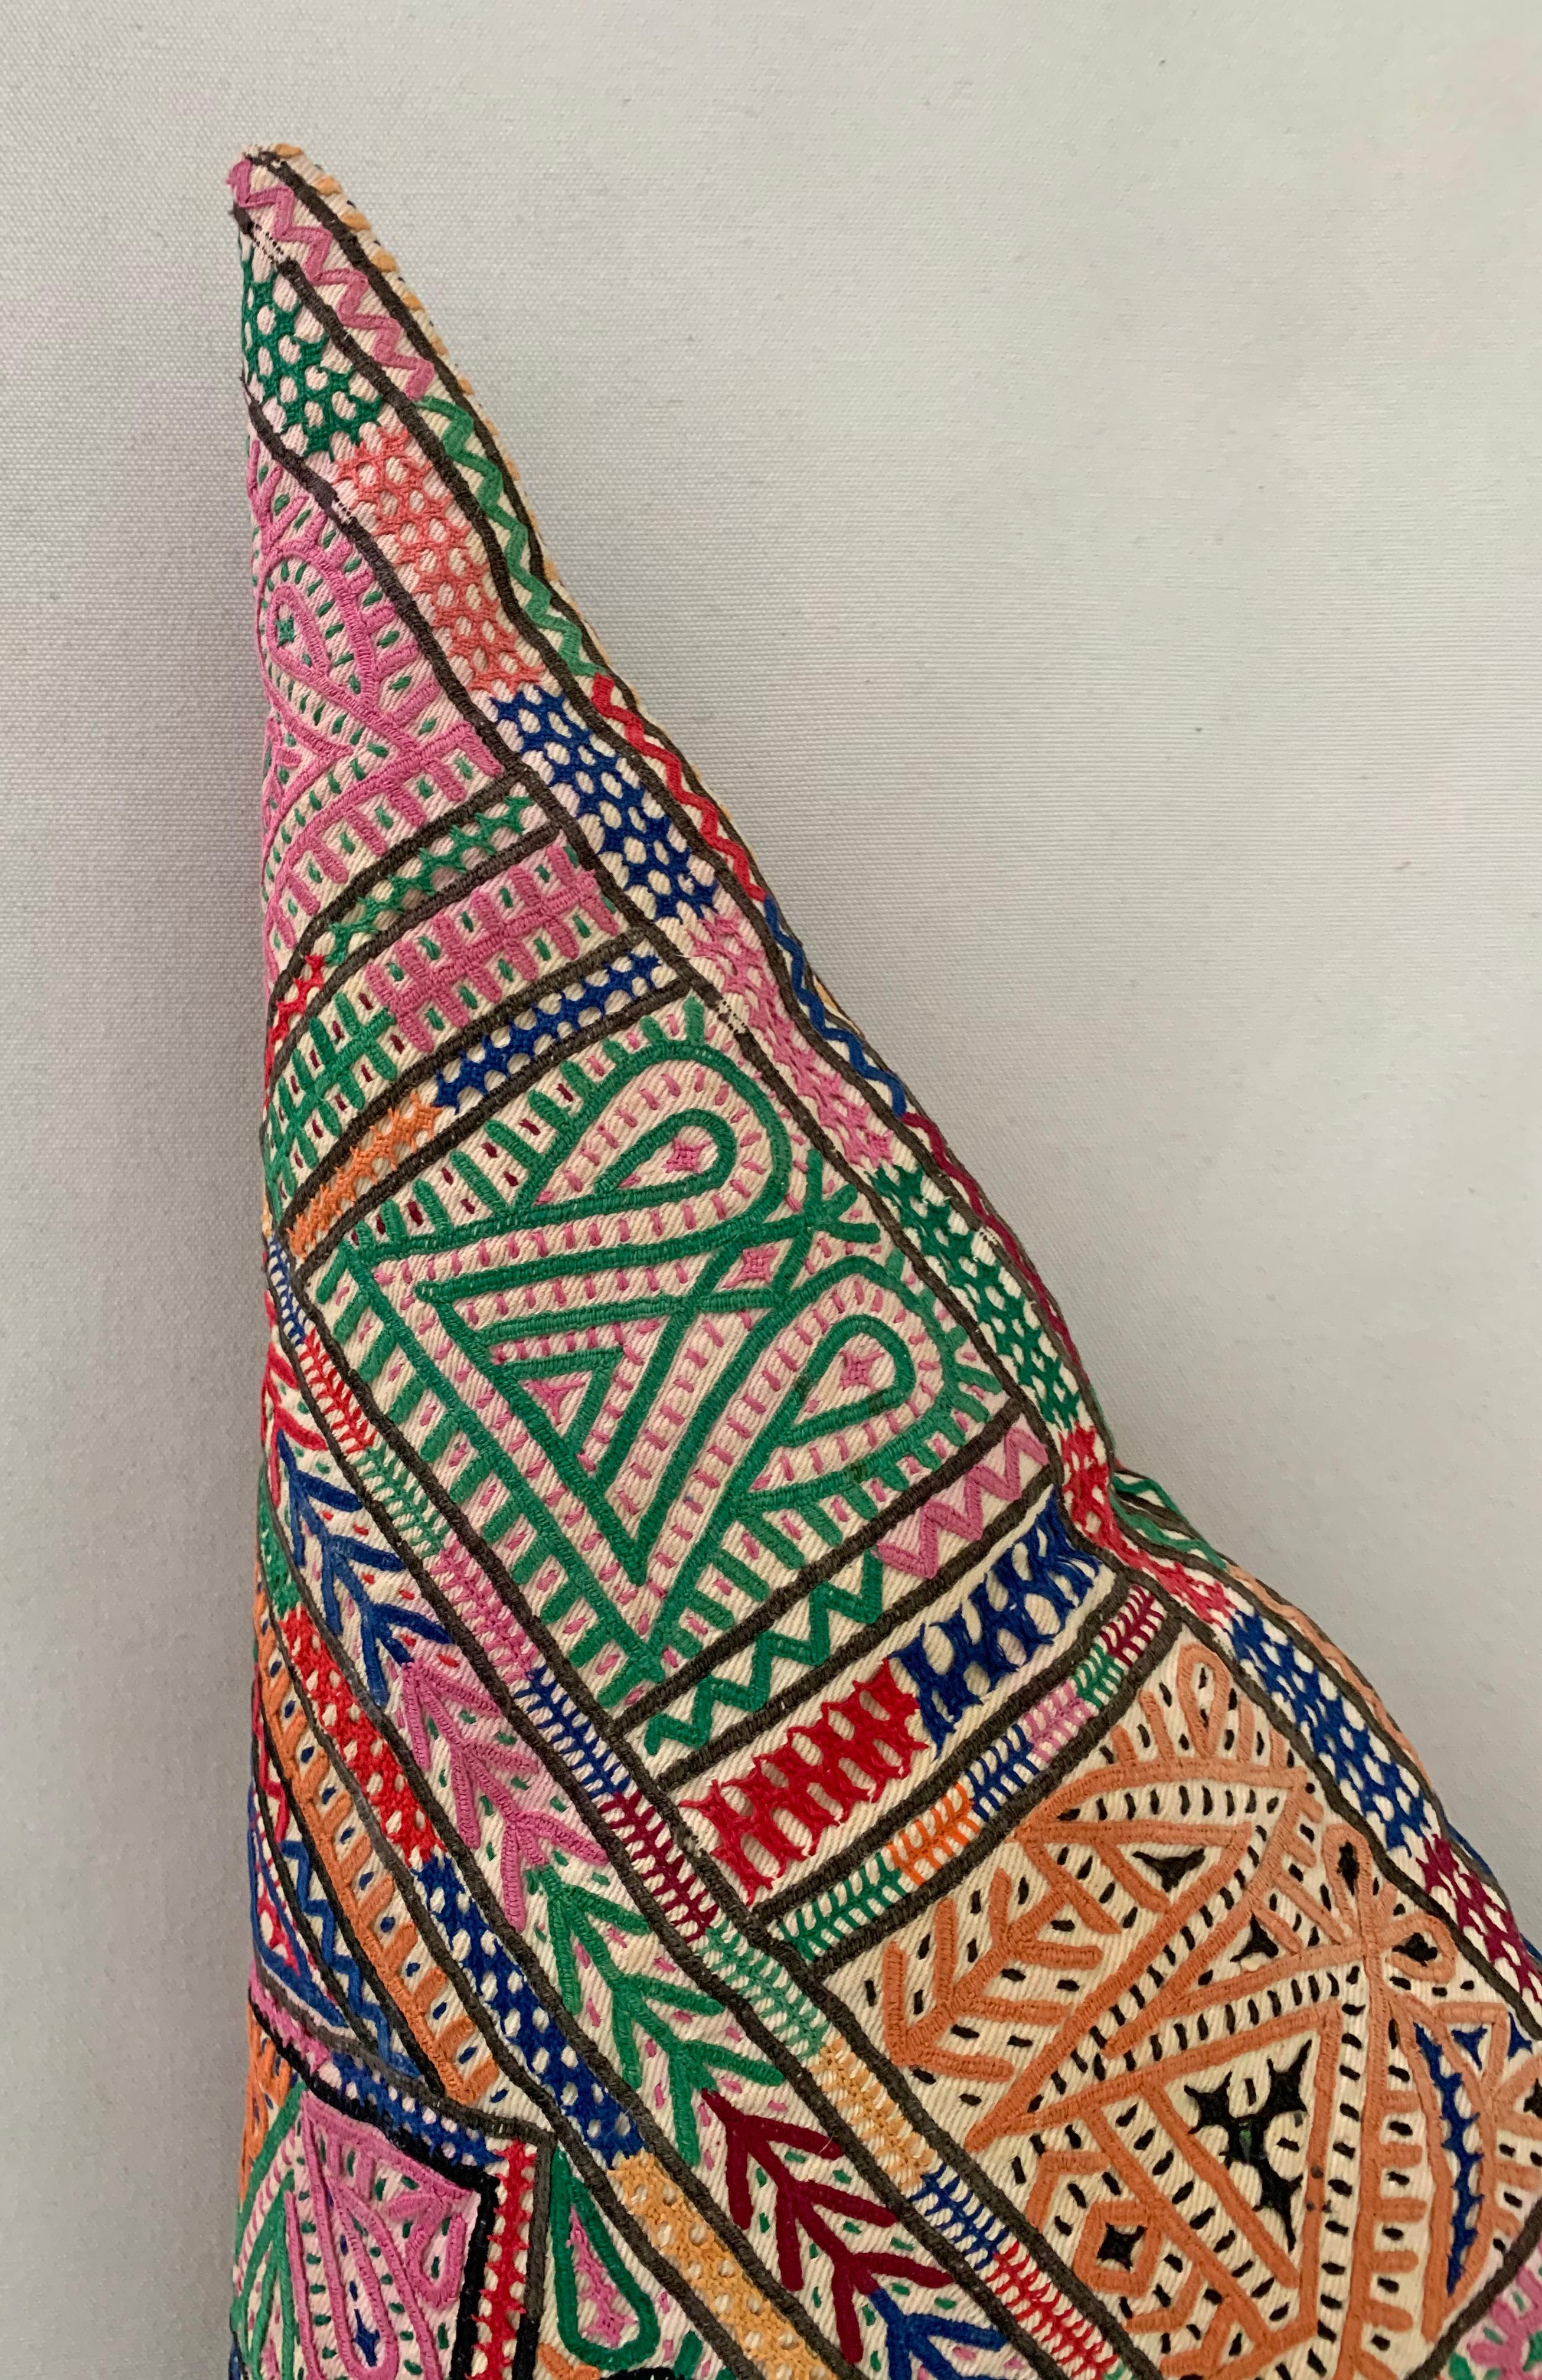 Embroidered Vintage Indian Decorative Pillow with Colourful Embroidery